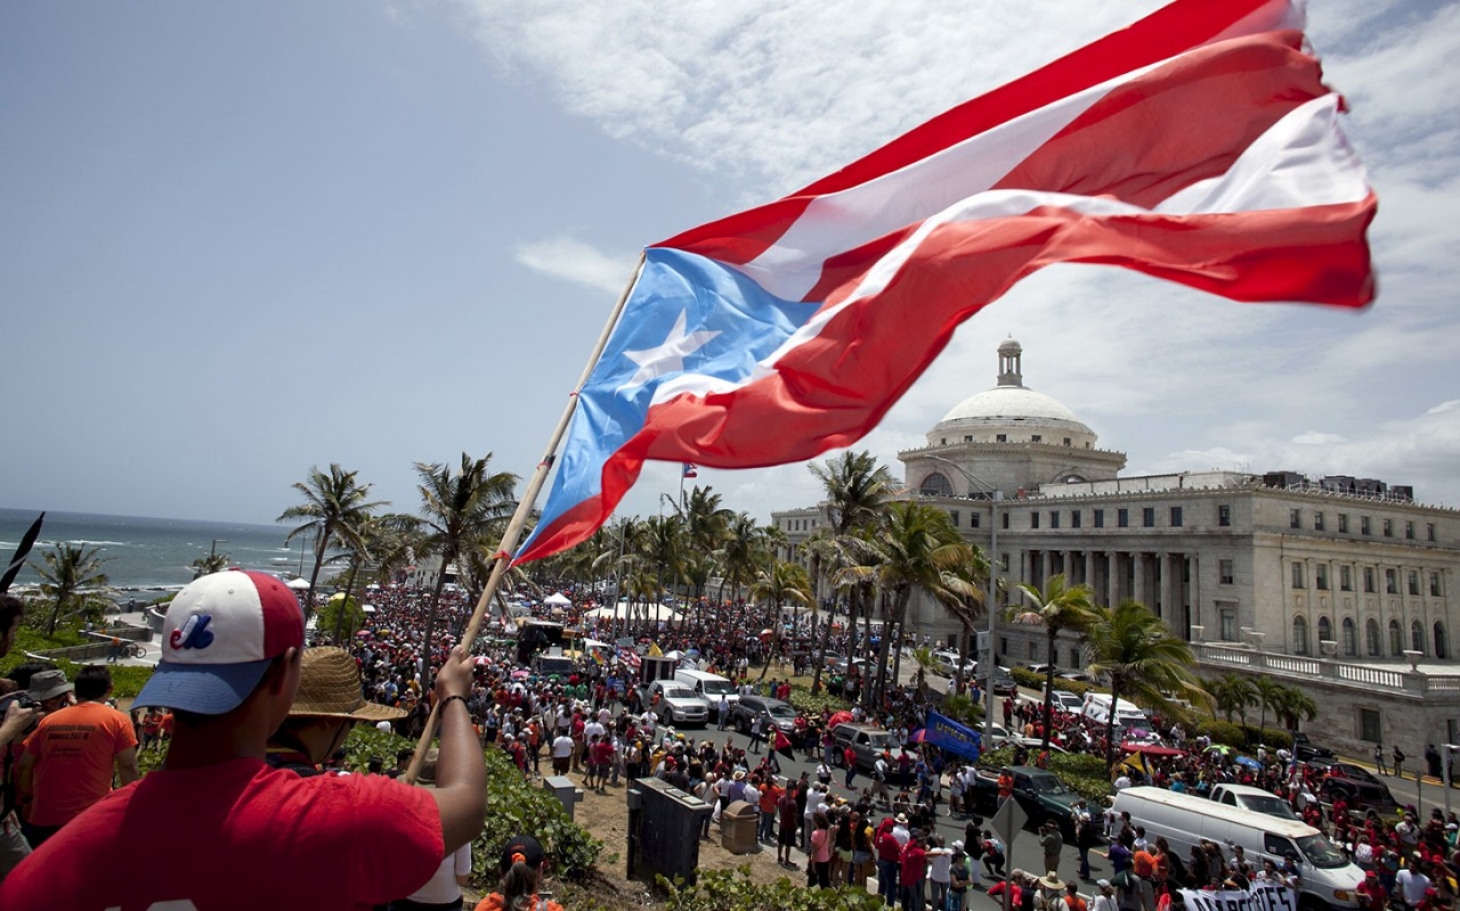 The Independence Of Puerto Rico